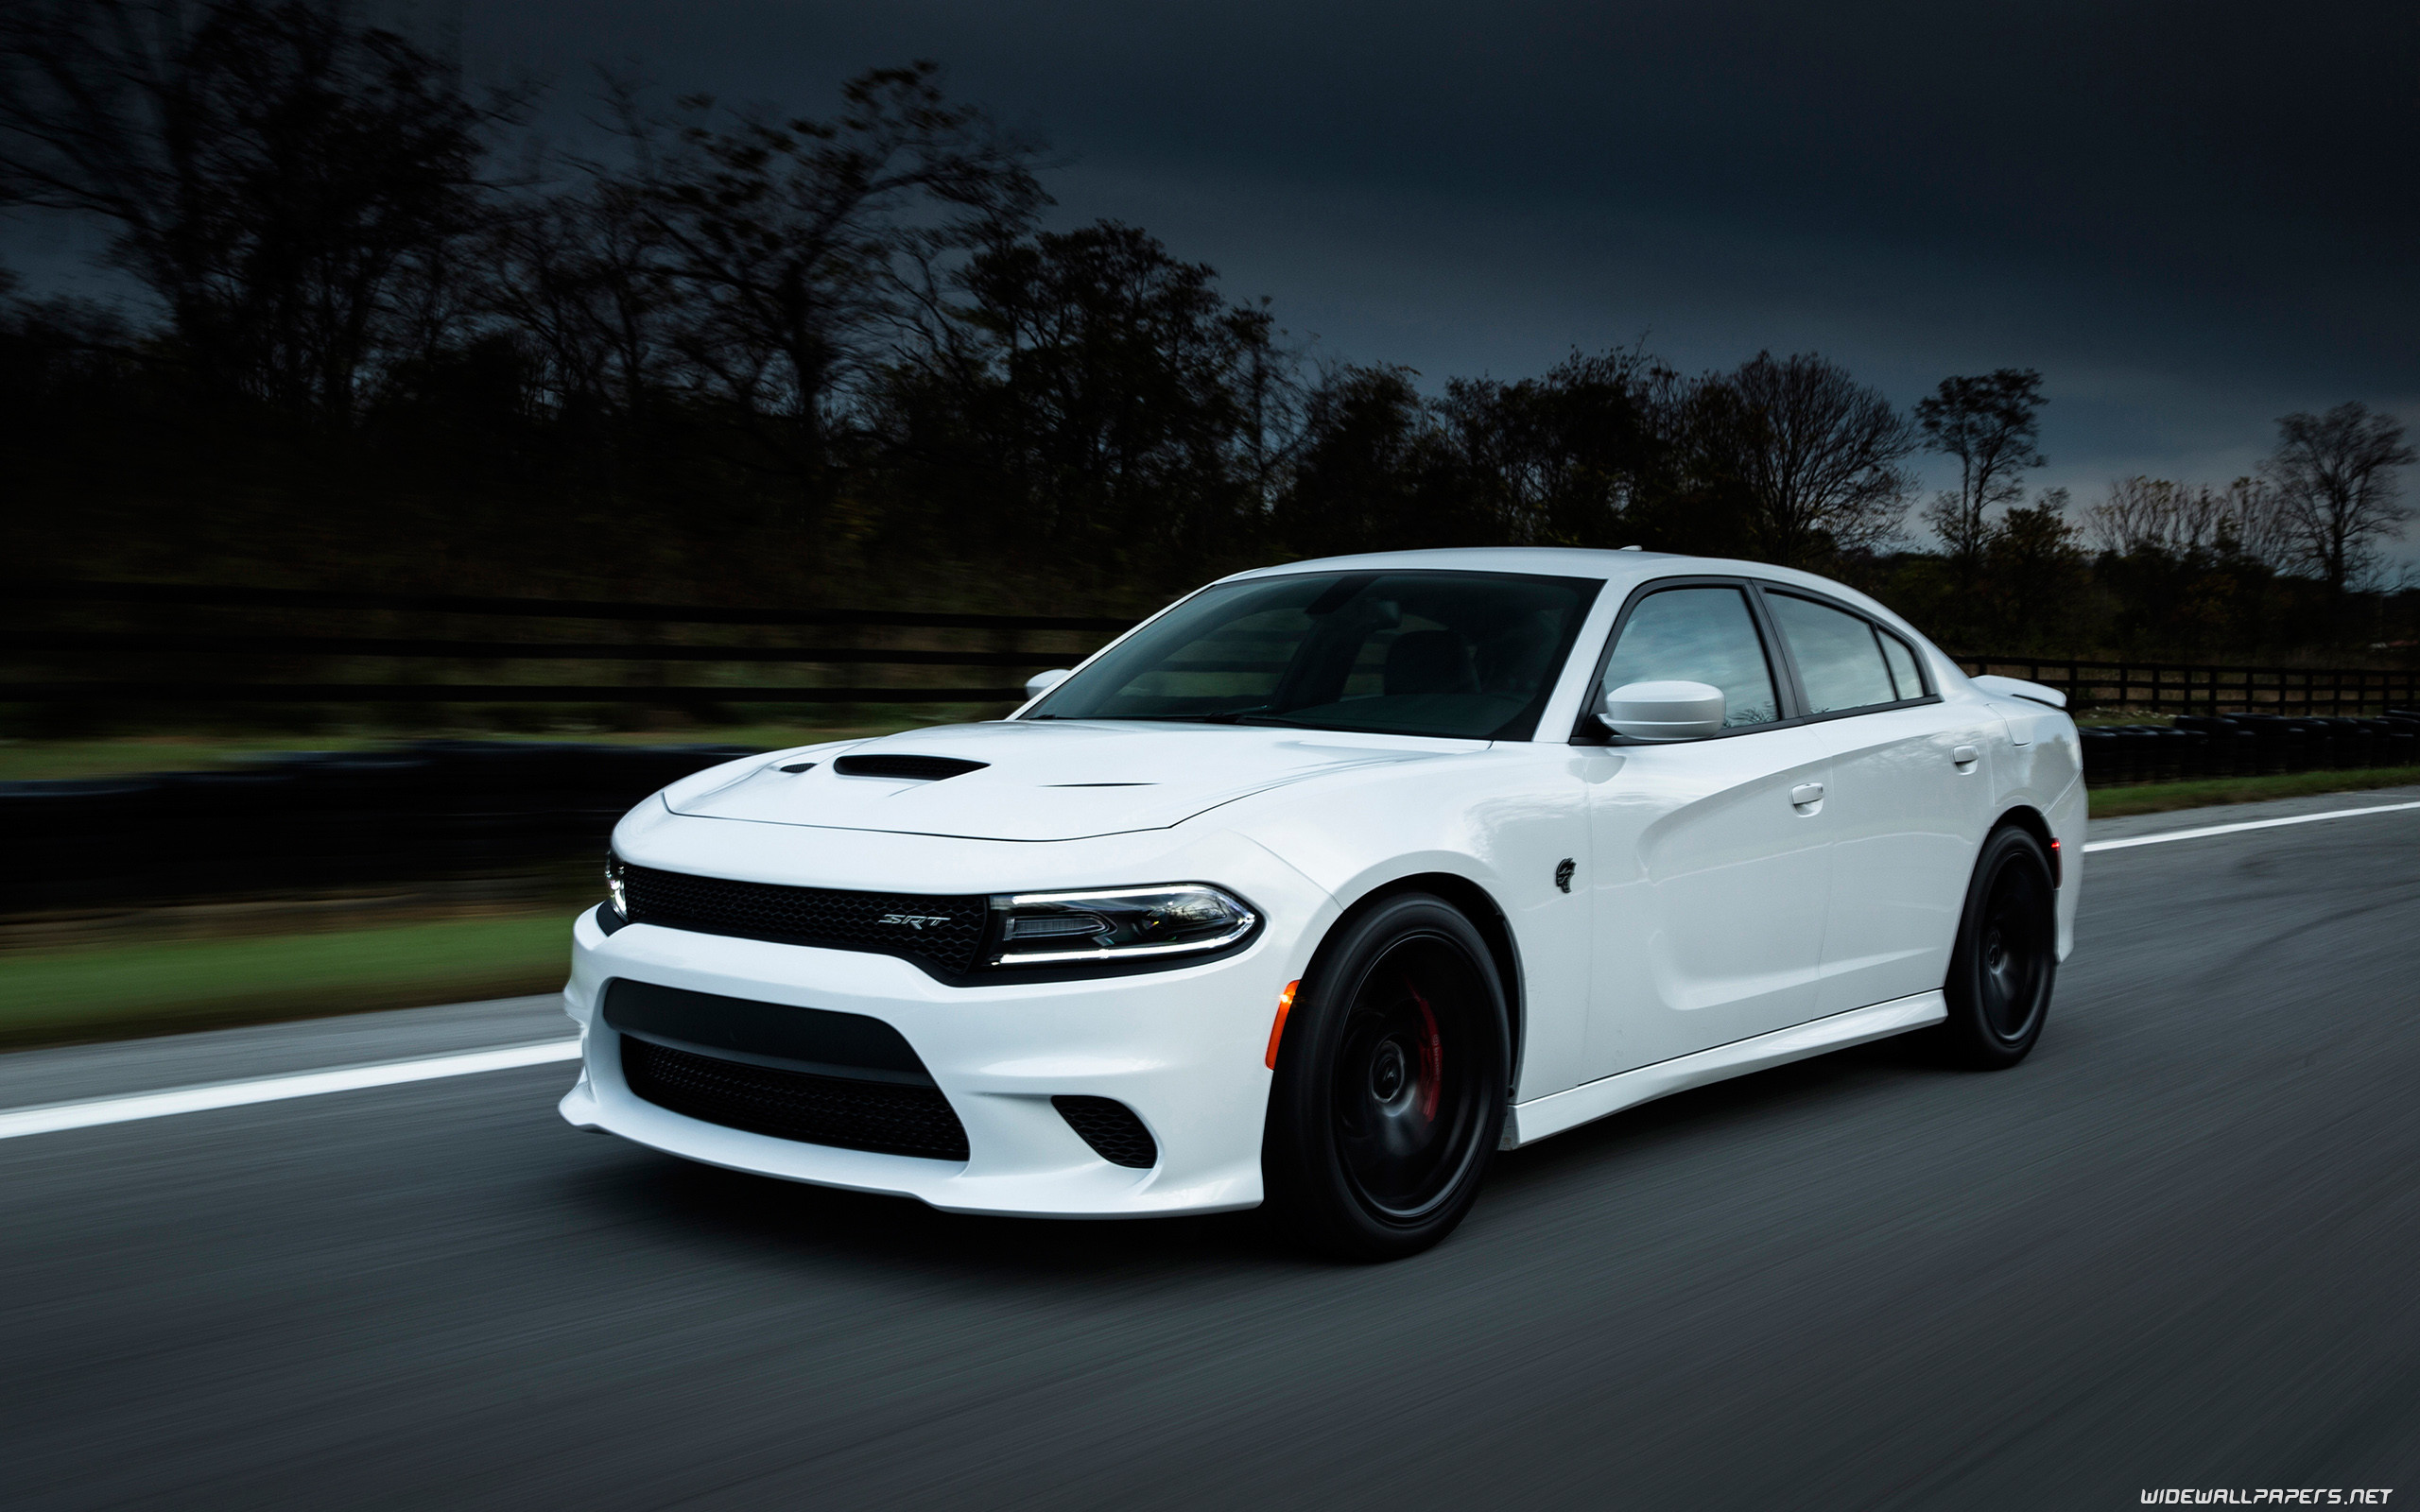 2560x1600 1920x1200 2016 Dodge Charger Hellcat Wallpaper Background 49838 -  Background .